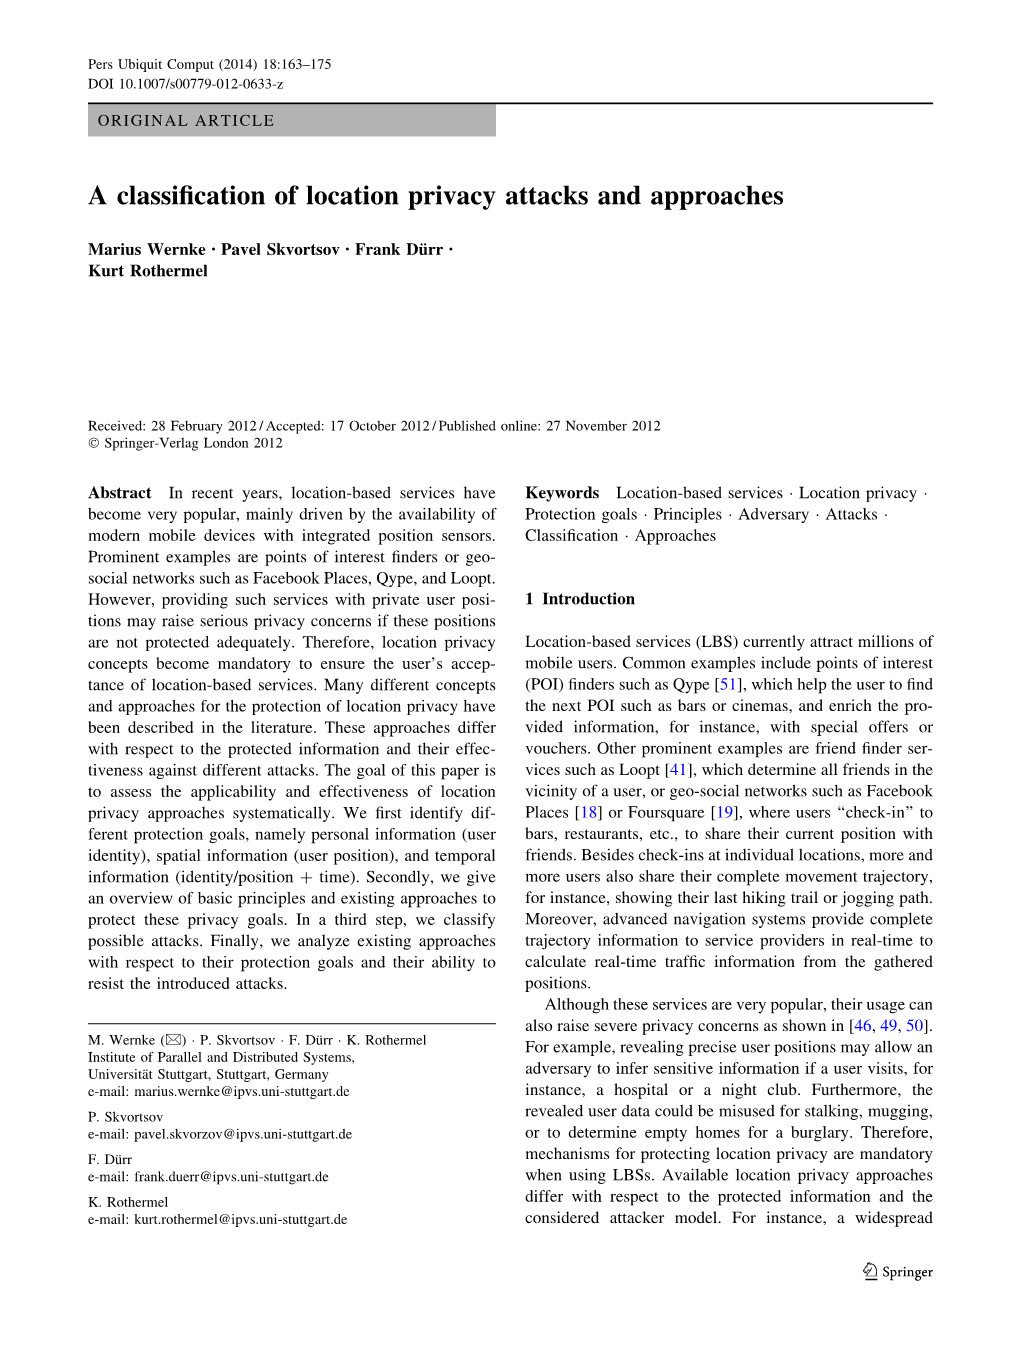 A Classification of Location Privacy Attacks and Approaches